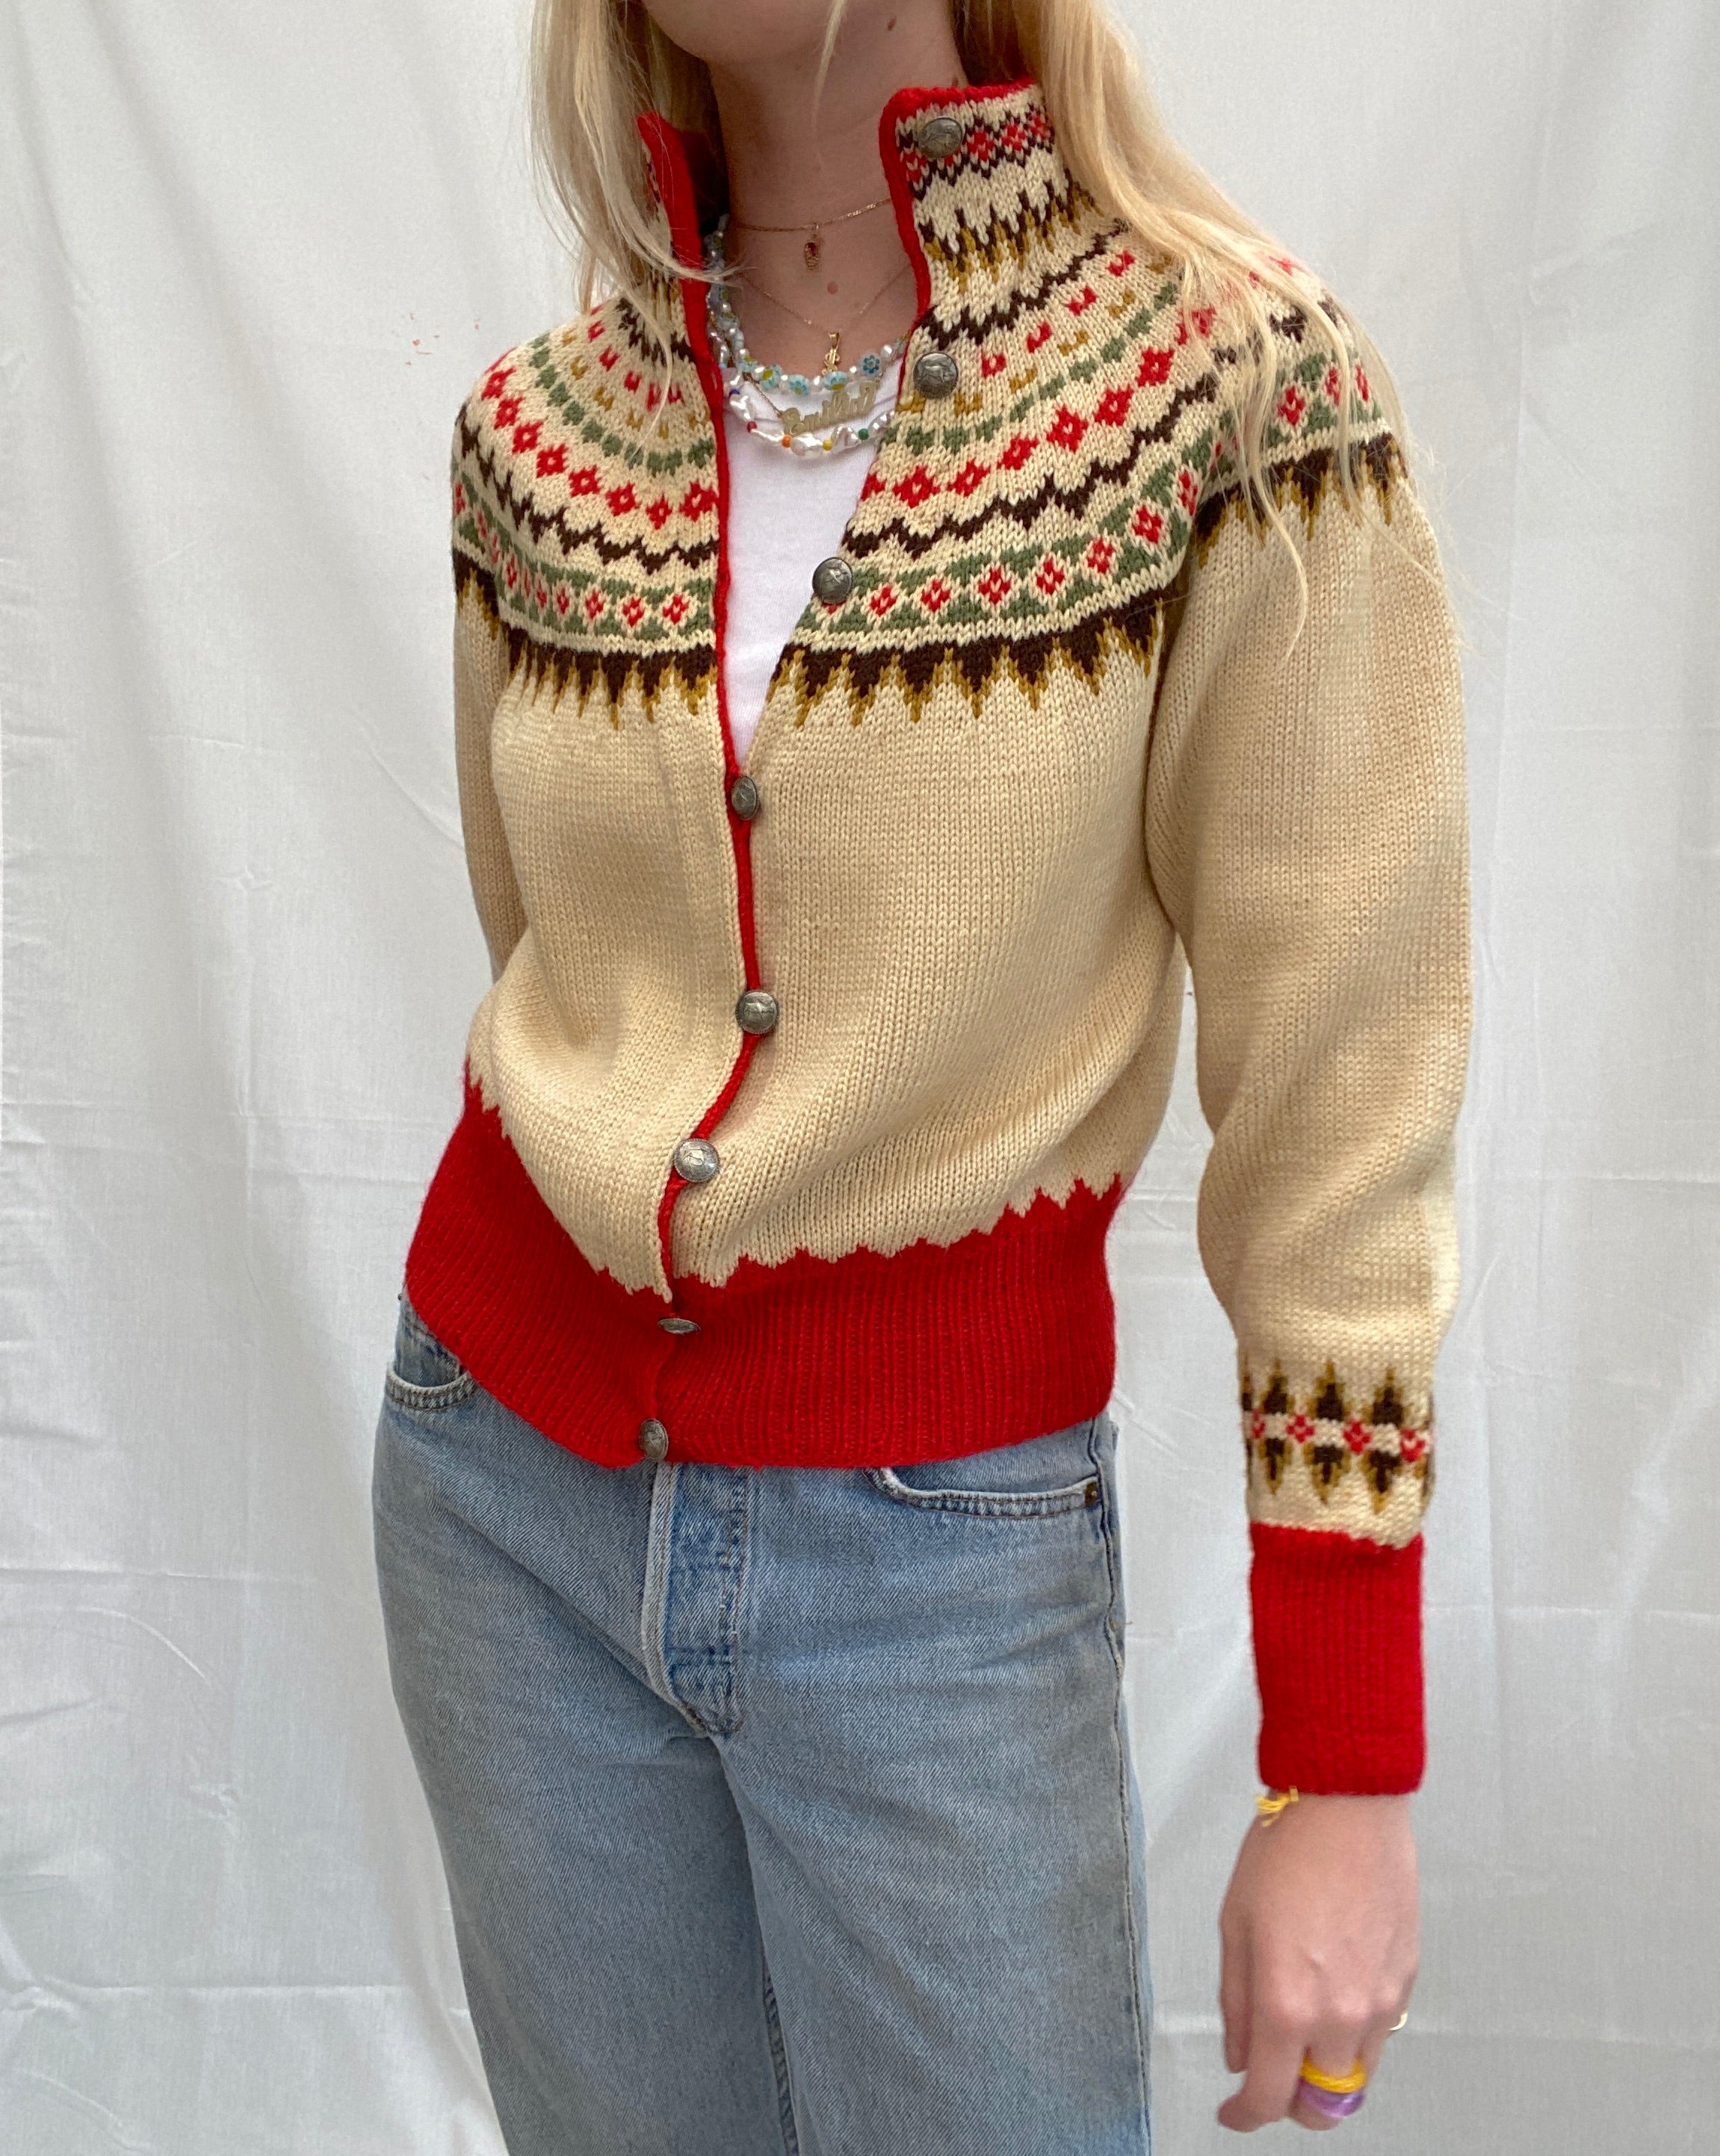 Cream Nordic Cardigan With Multicolor Pattern and High Neck.